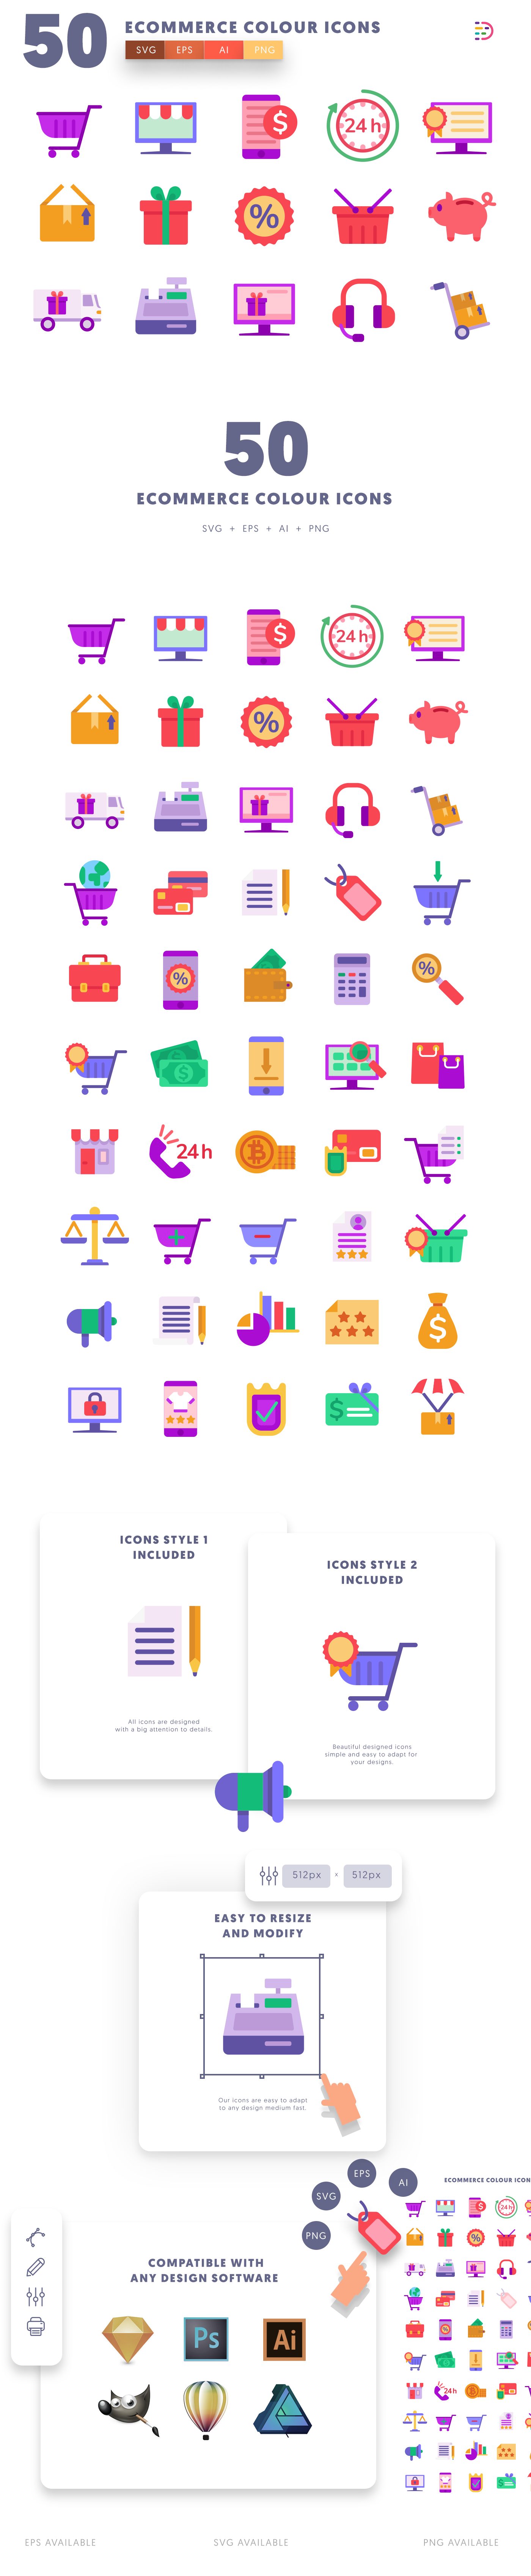 Editable Ecommerce Colour icons icon pack, easy to edit and customize icons